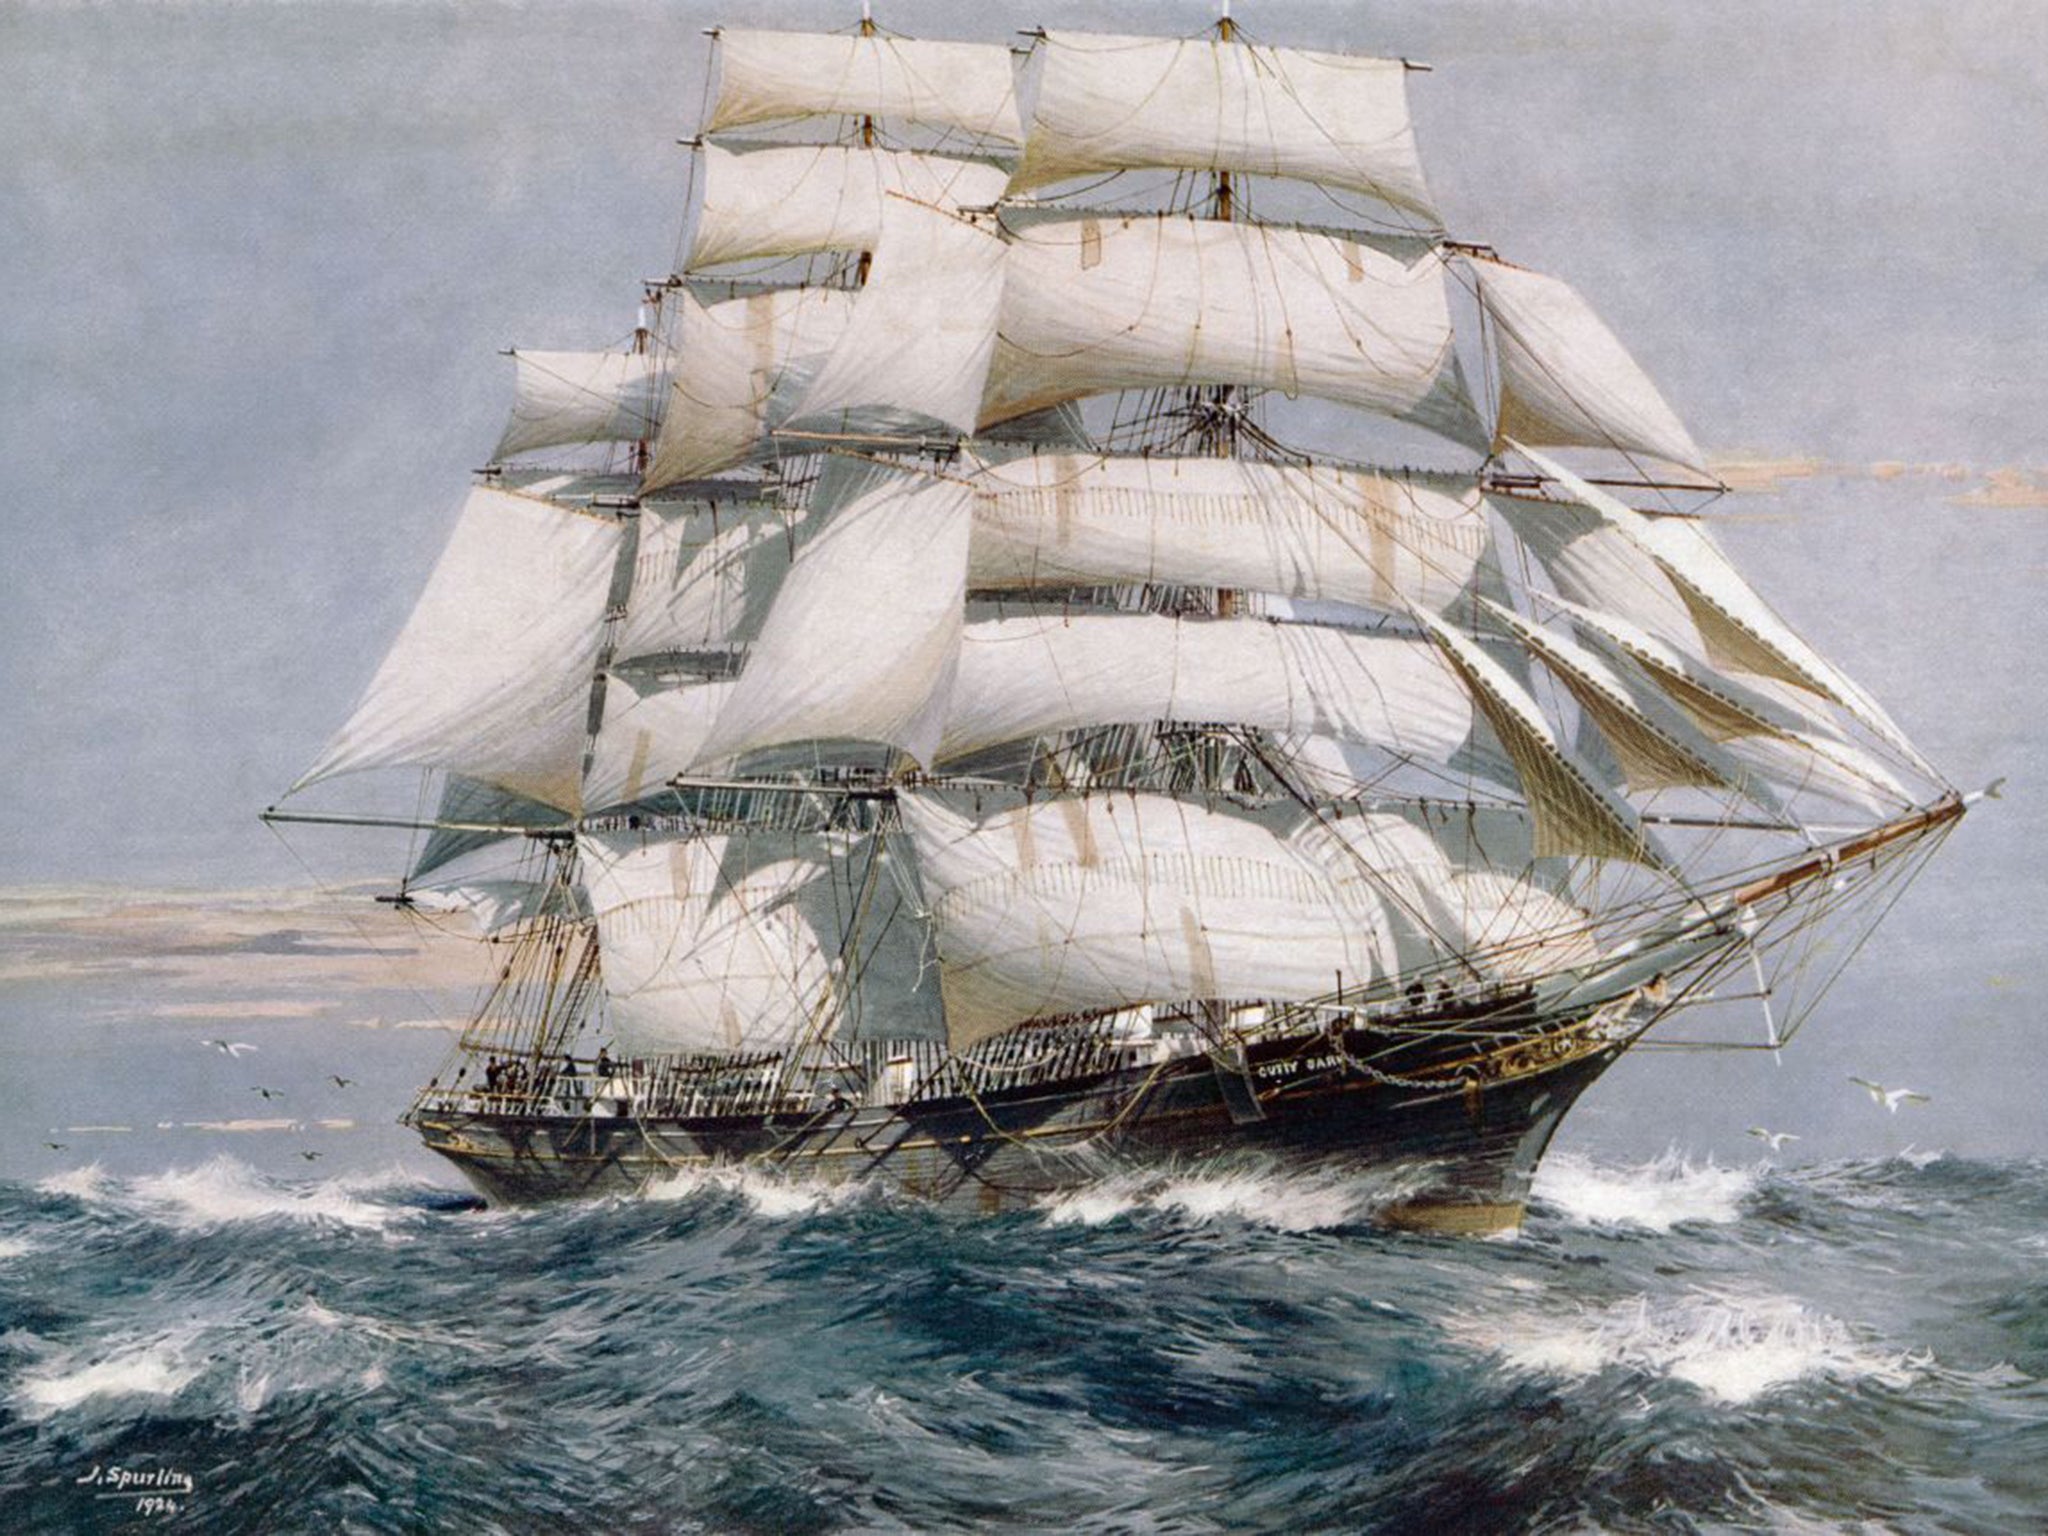 The Cutty Sark was one of the last tea clippers to be built, and one of the fastest